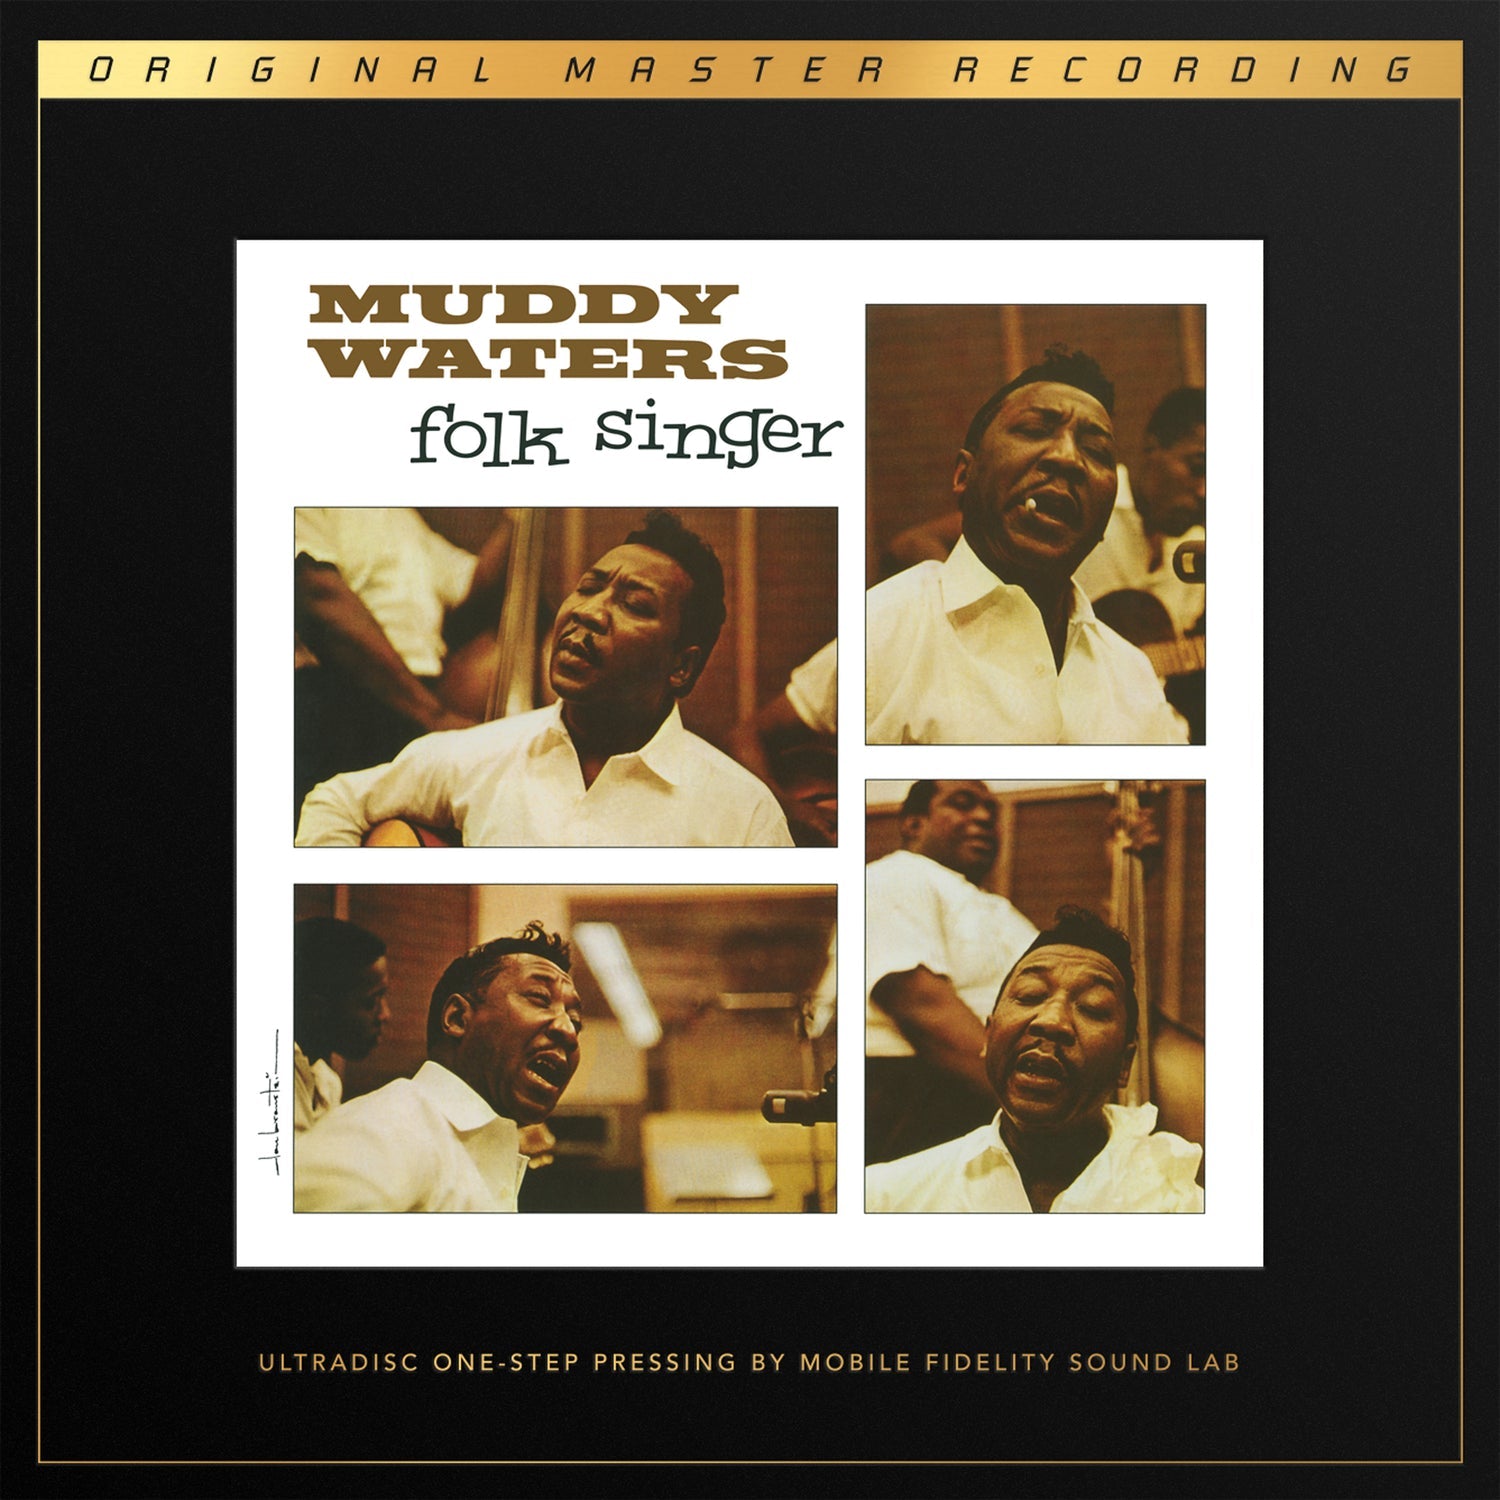 Muddy Waters - Folk Singer (Mobile Fidelity Sound Labs)